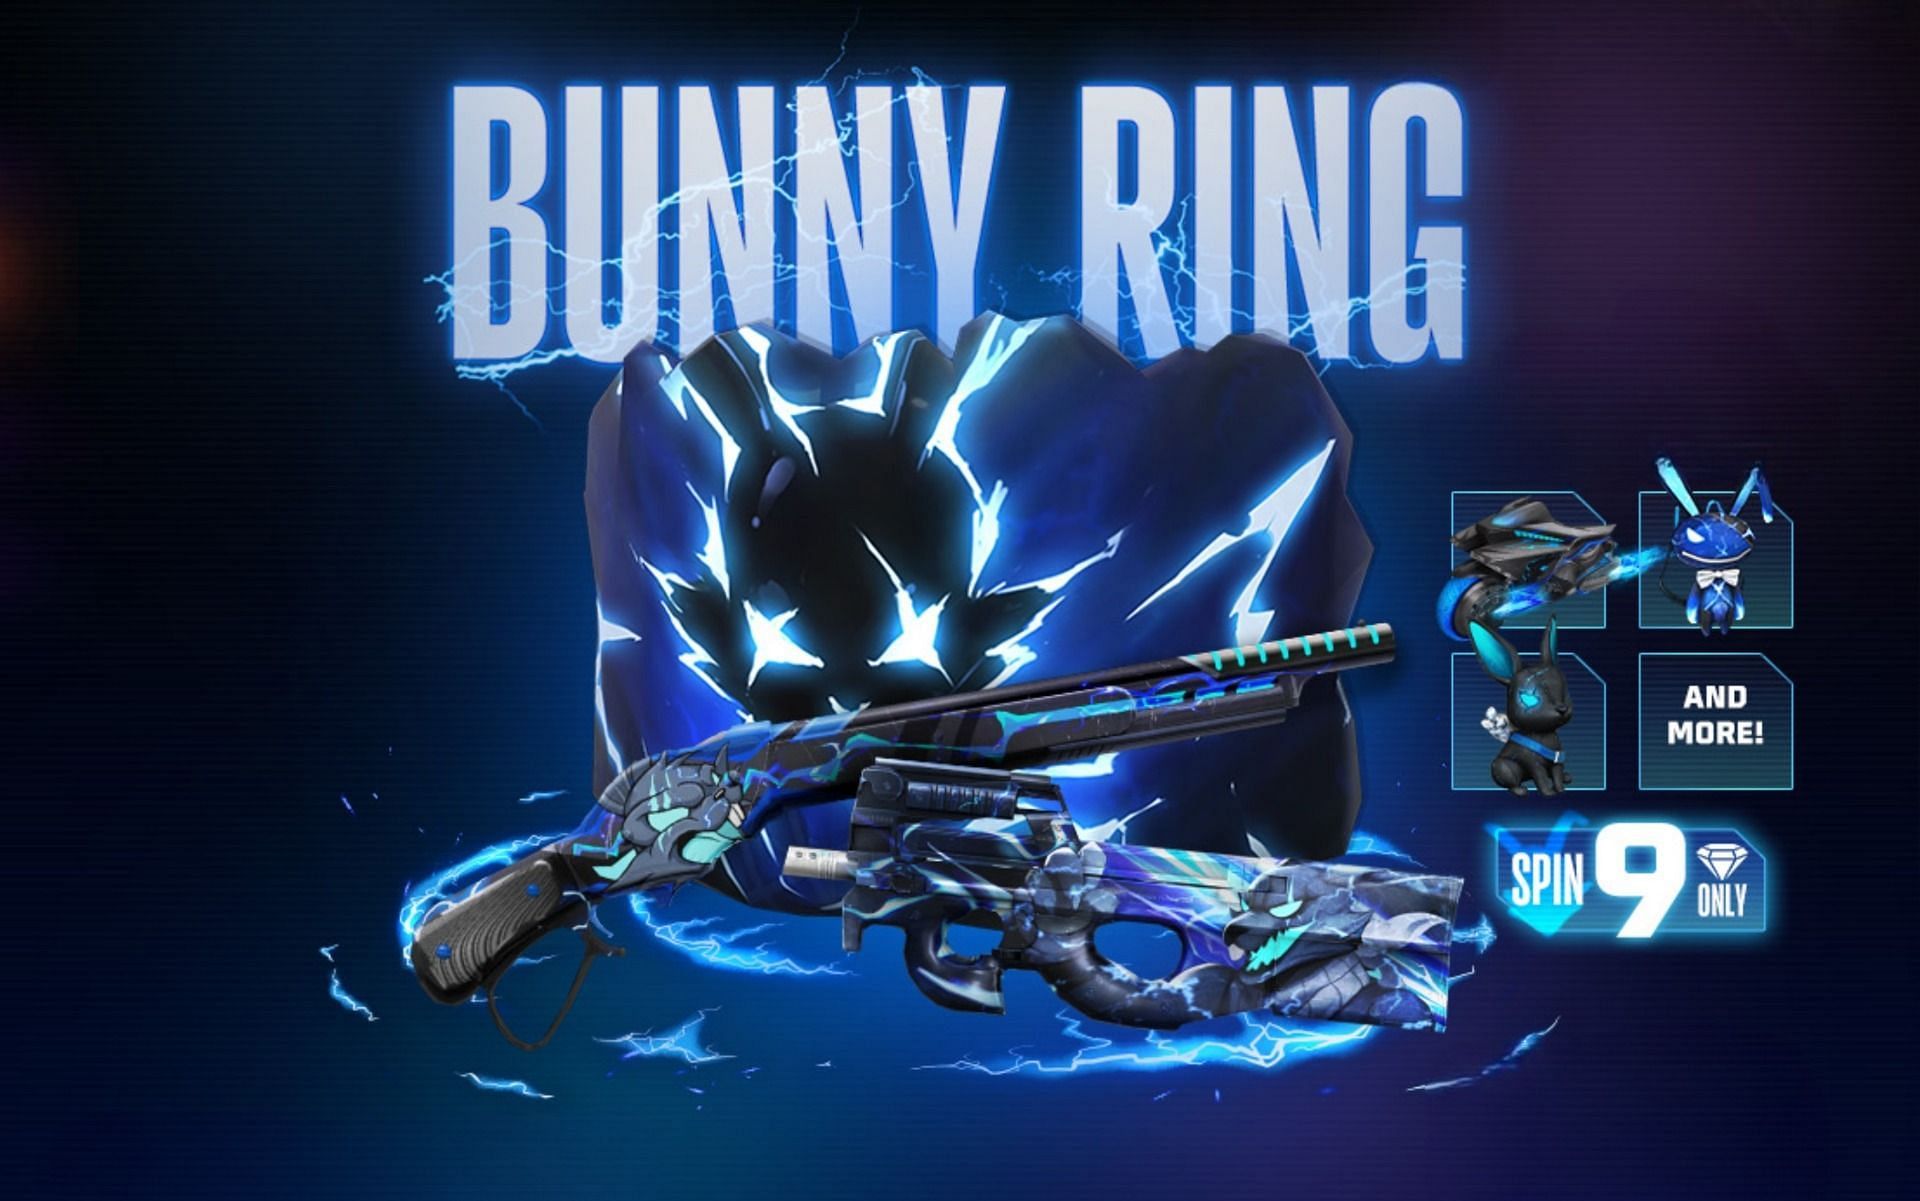 Bunny Ring event is currently active in the game, offering multiple themed rewards (Image via Garena)